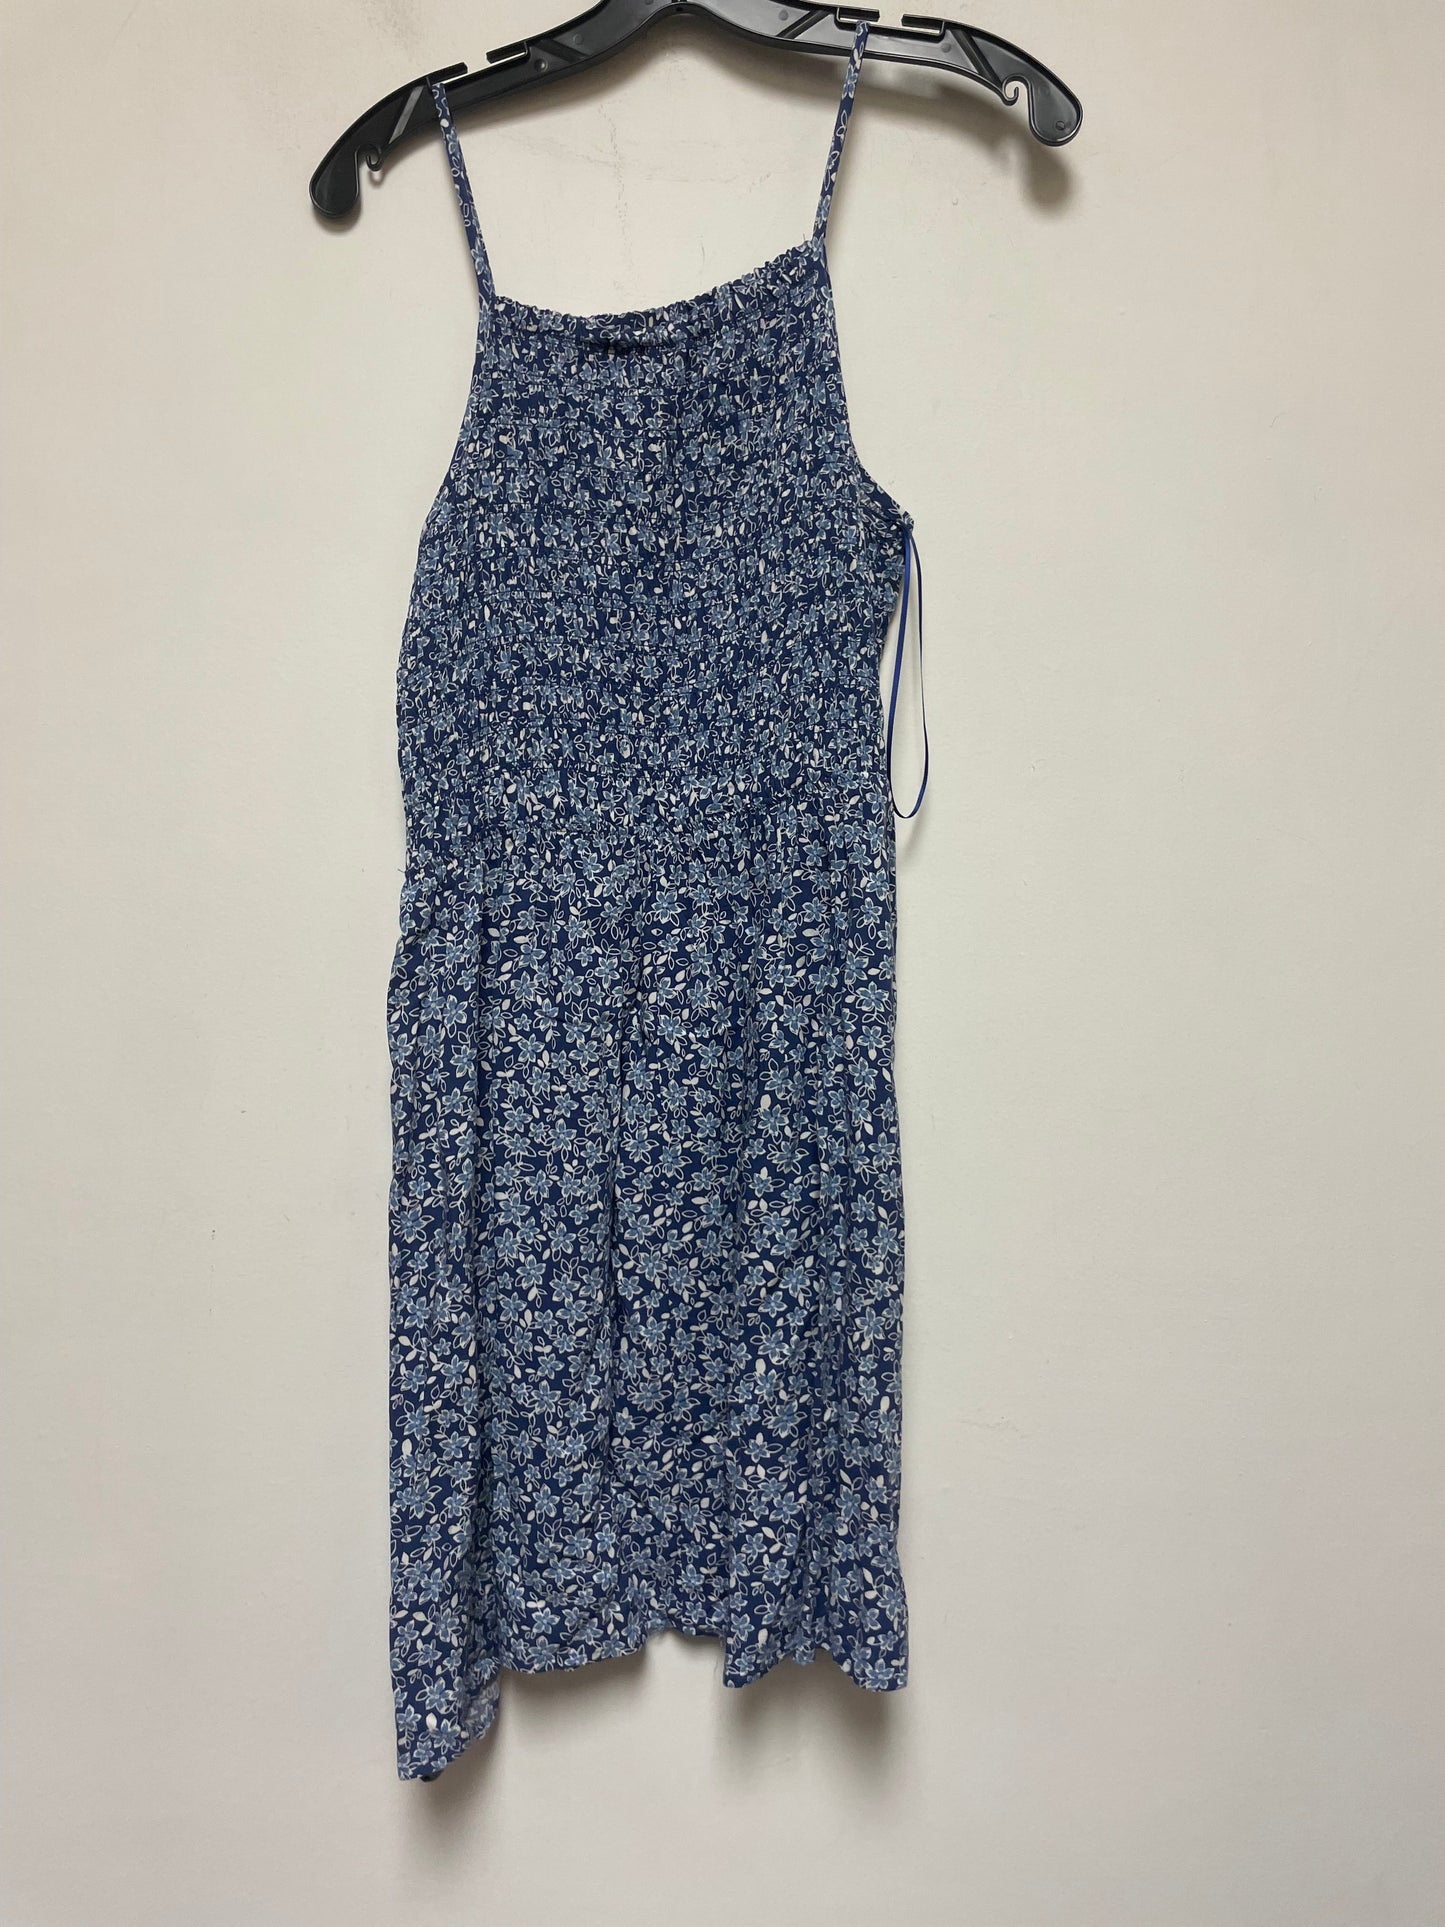 Dress Casual Short By Copper Key  Size: M